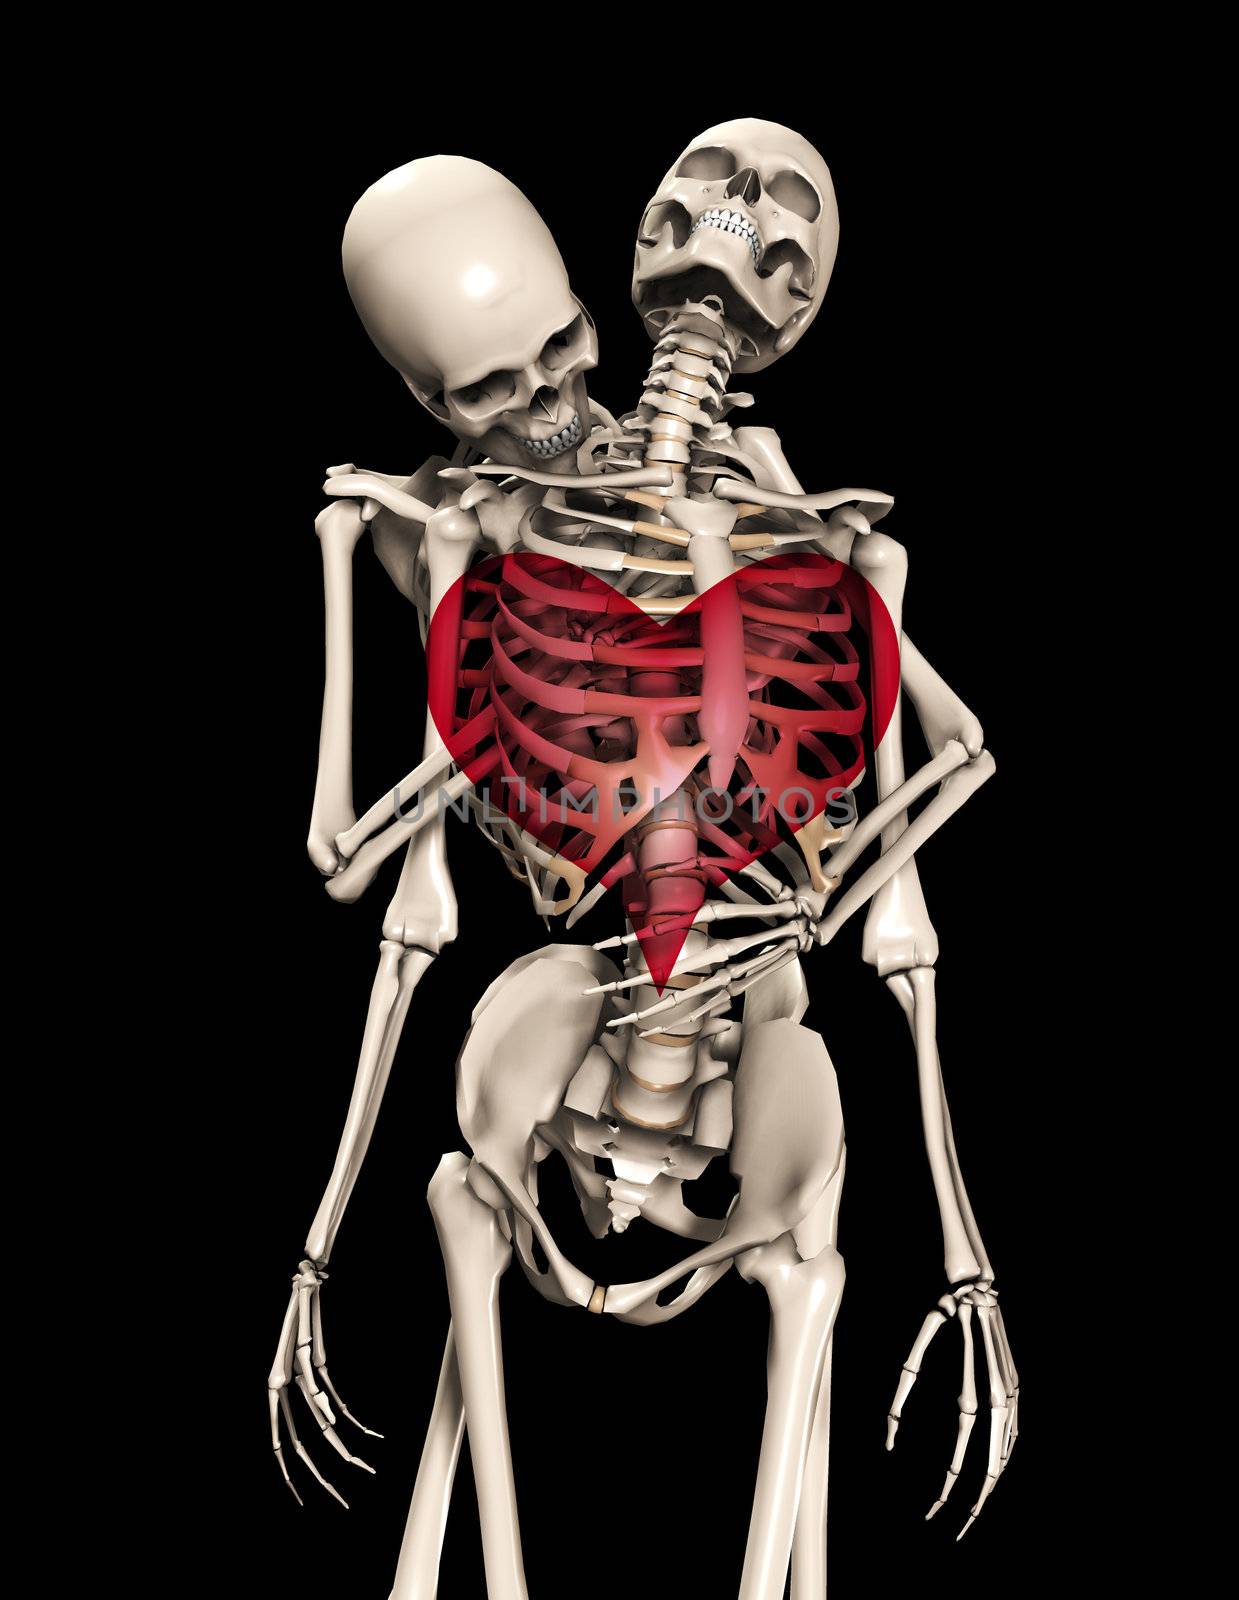 Concept image about love and romance featuring skeletons. 